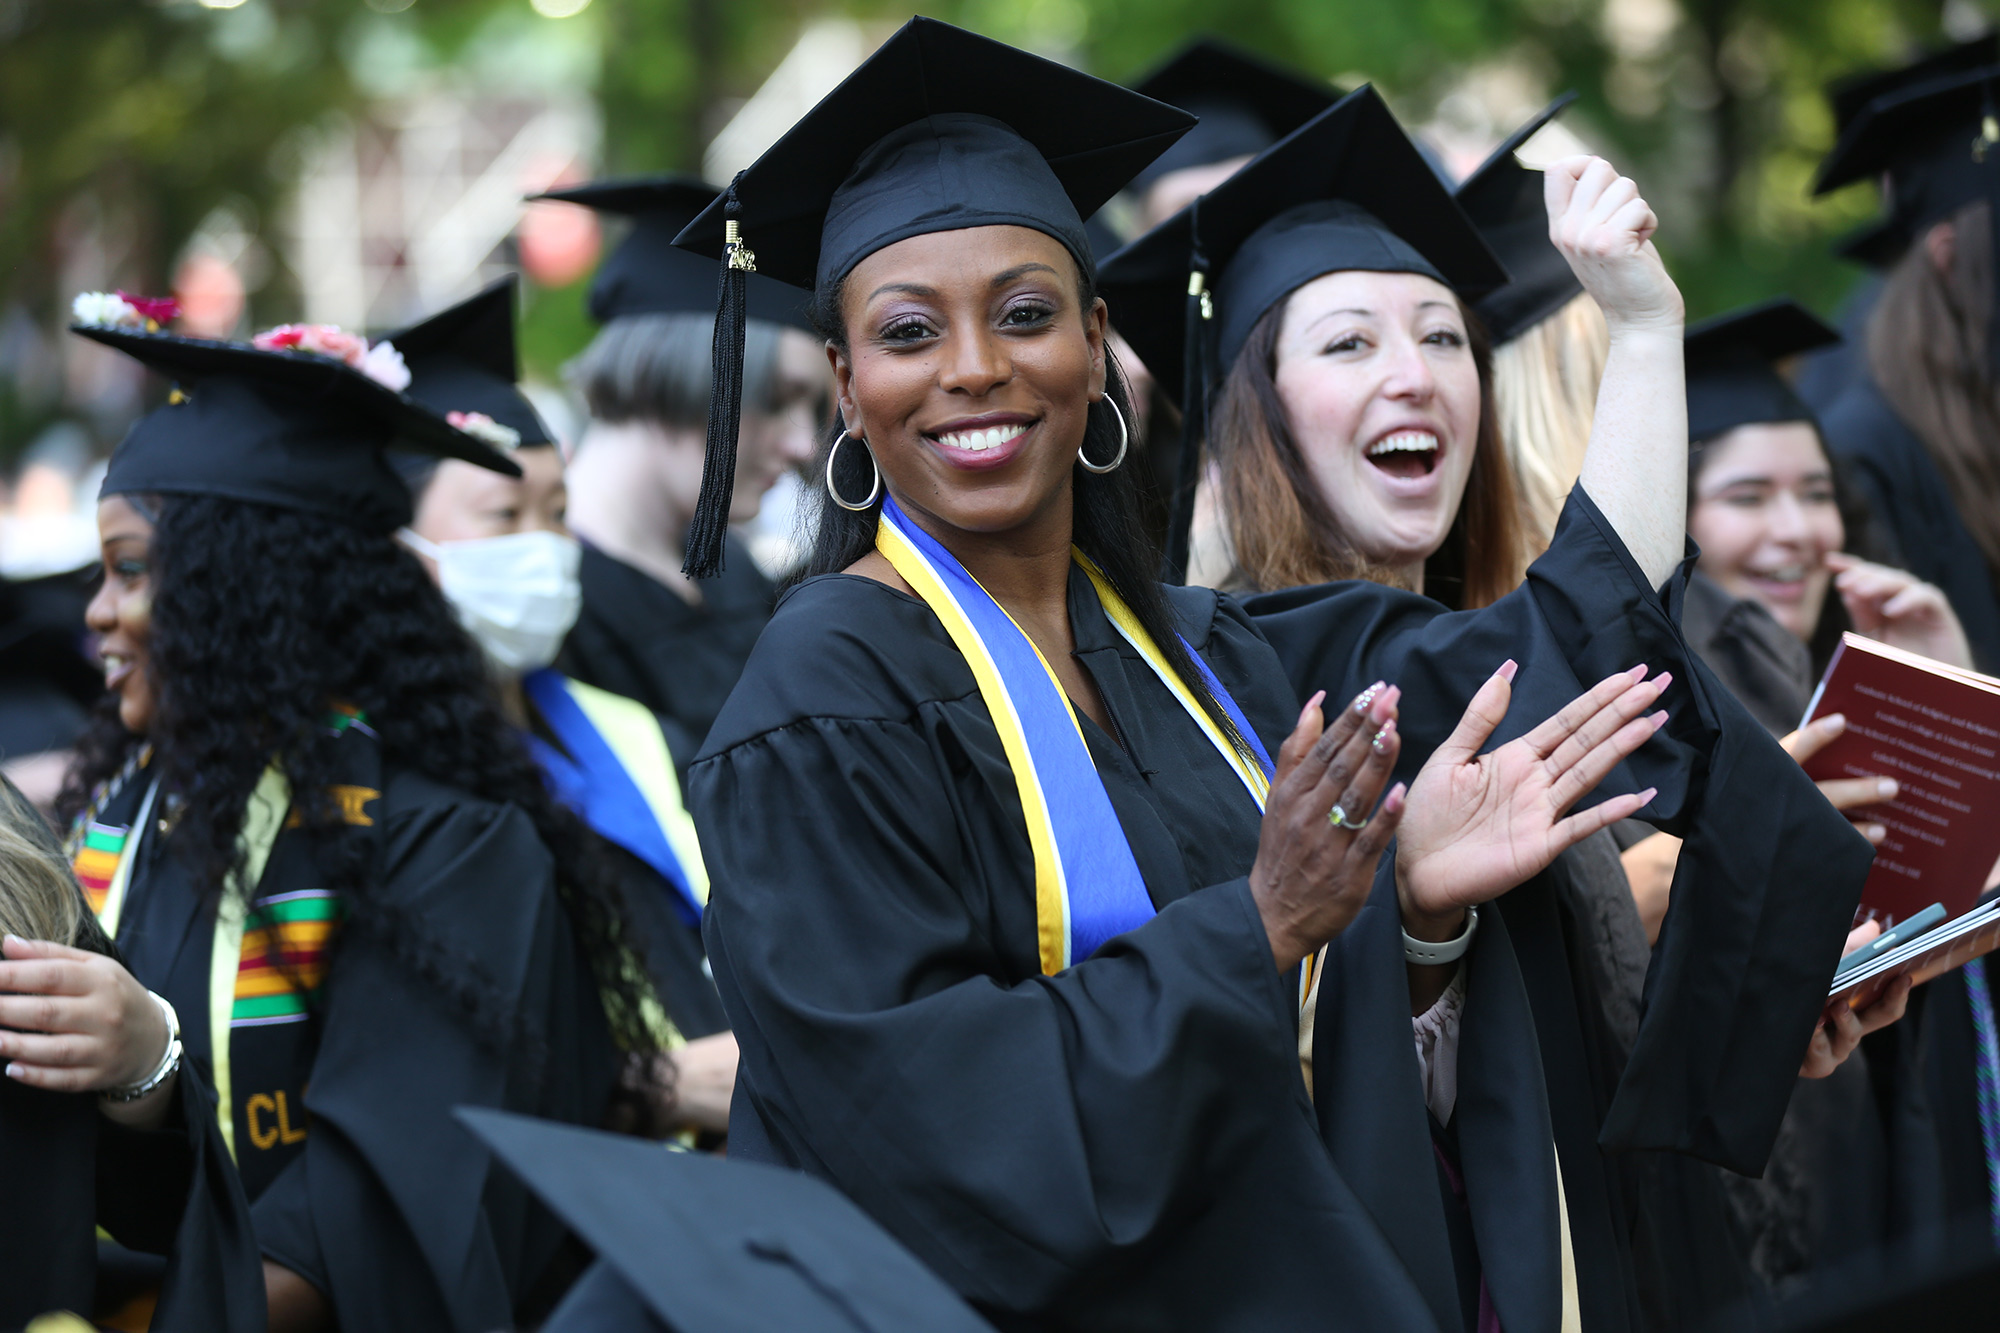 Female student clapping at Commencement 2022